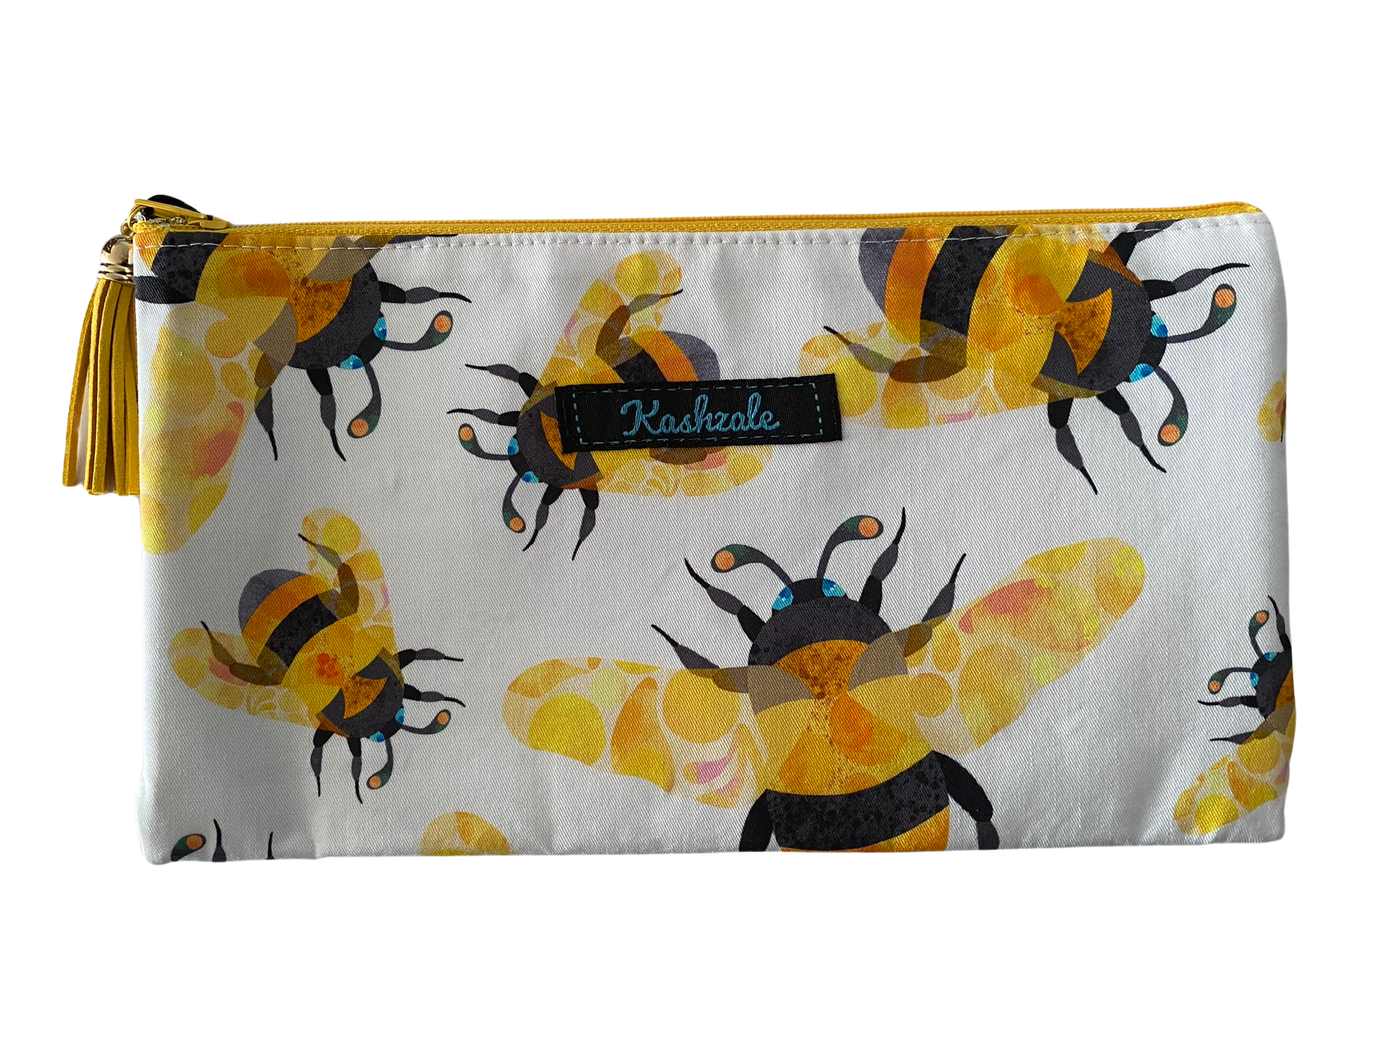 Busy Bees Large Size Zipper Pouch